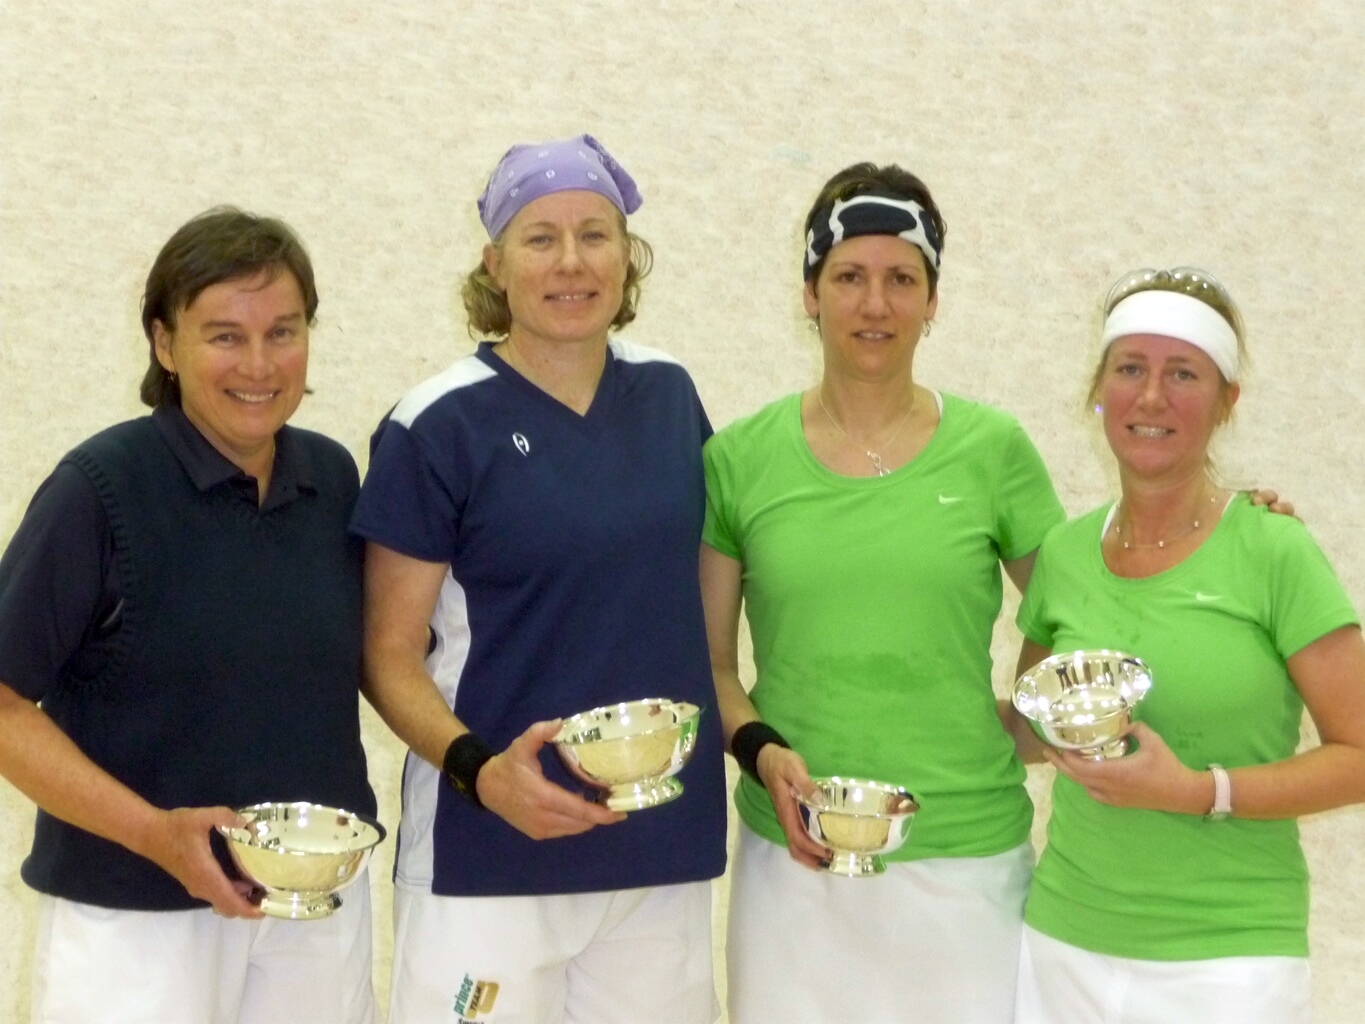 W40+ winners Sara Luther & Alicia McConnell with runners-up Cathy Covernton & Cairn Meek.